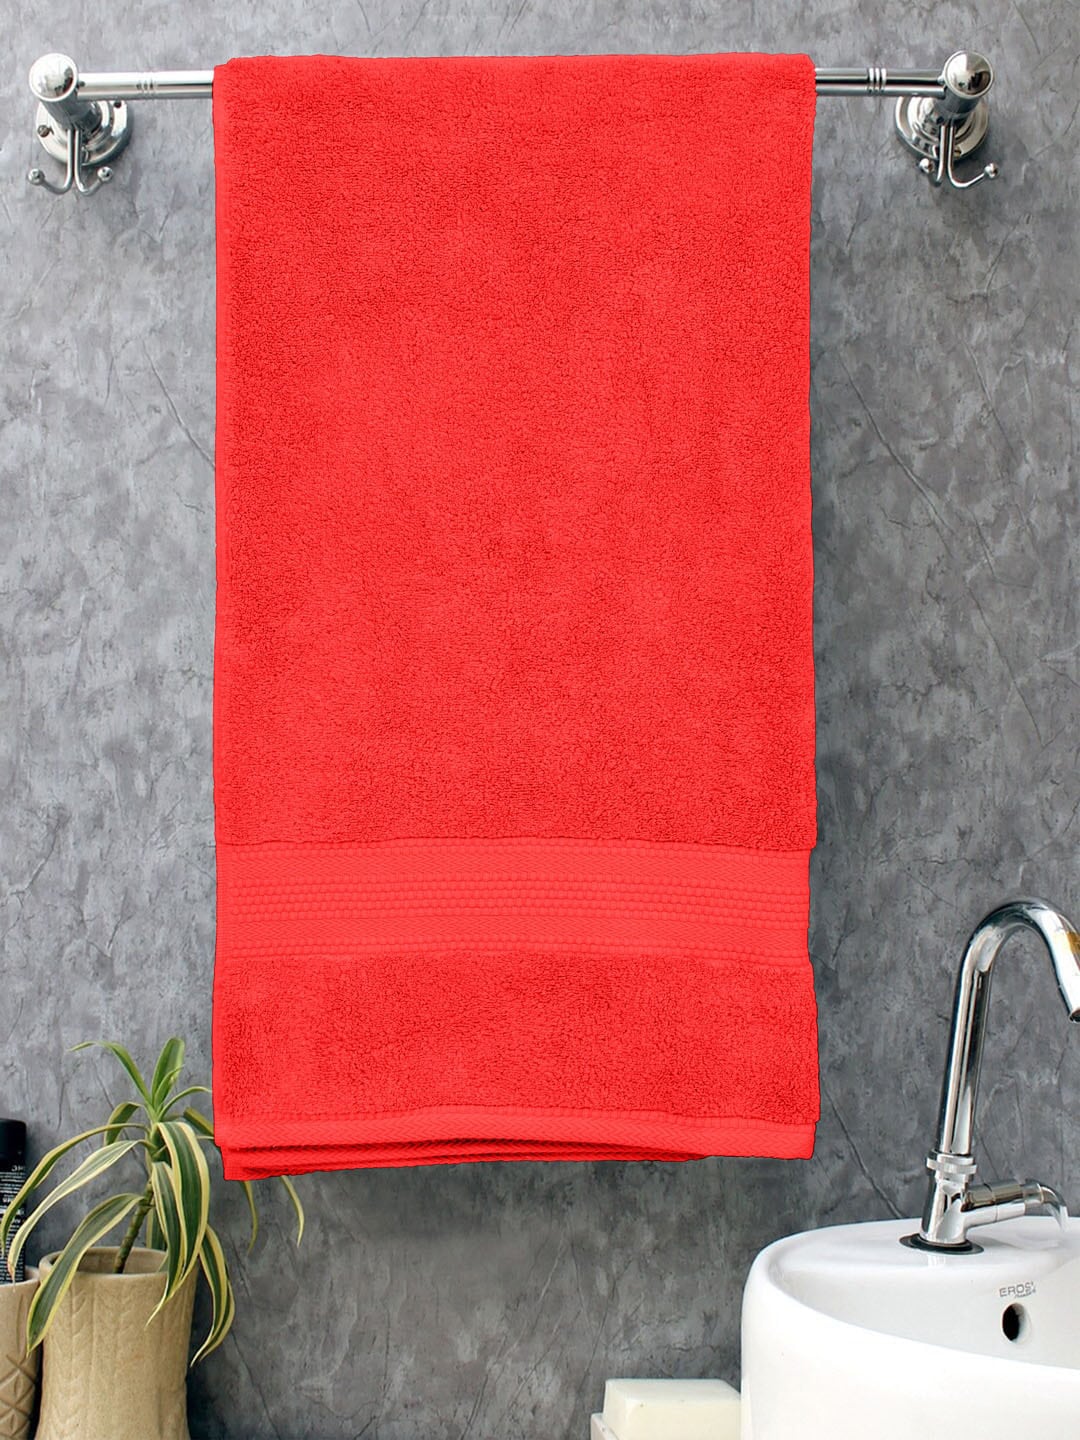 BOMBAY DYEING Red Solid 650 GSM Cotton Bath Towel Price in India